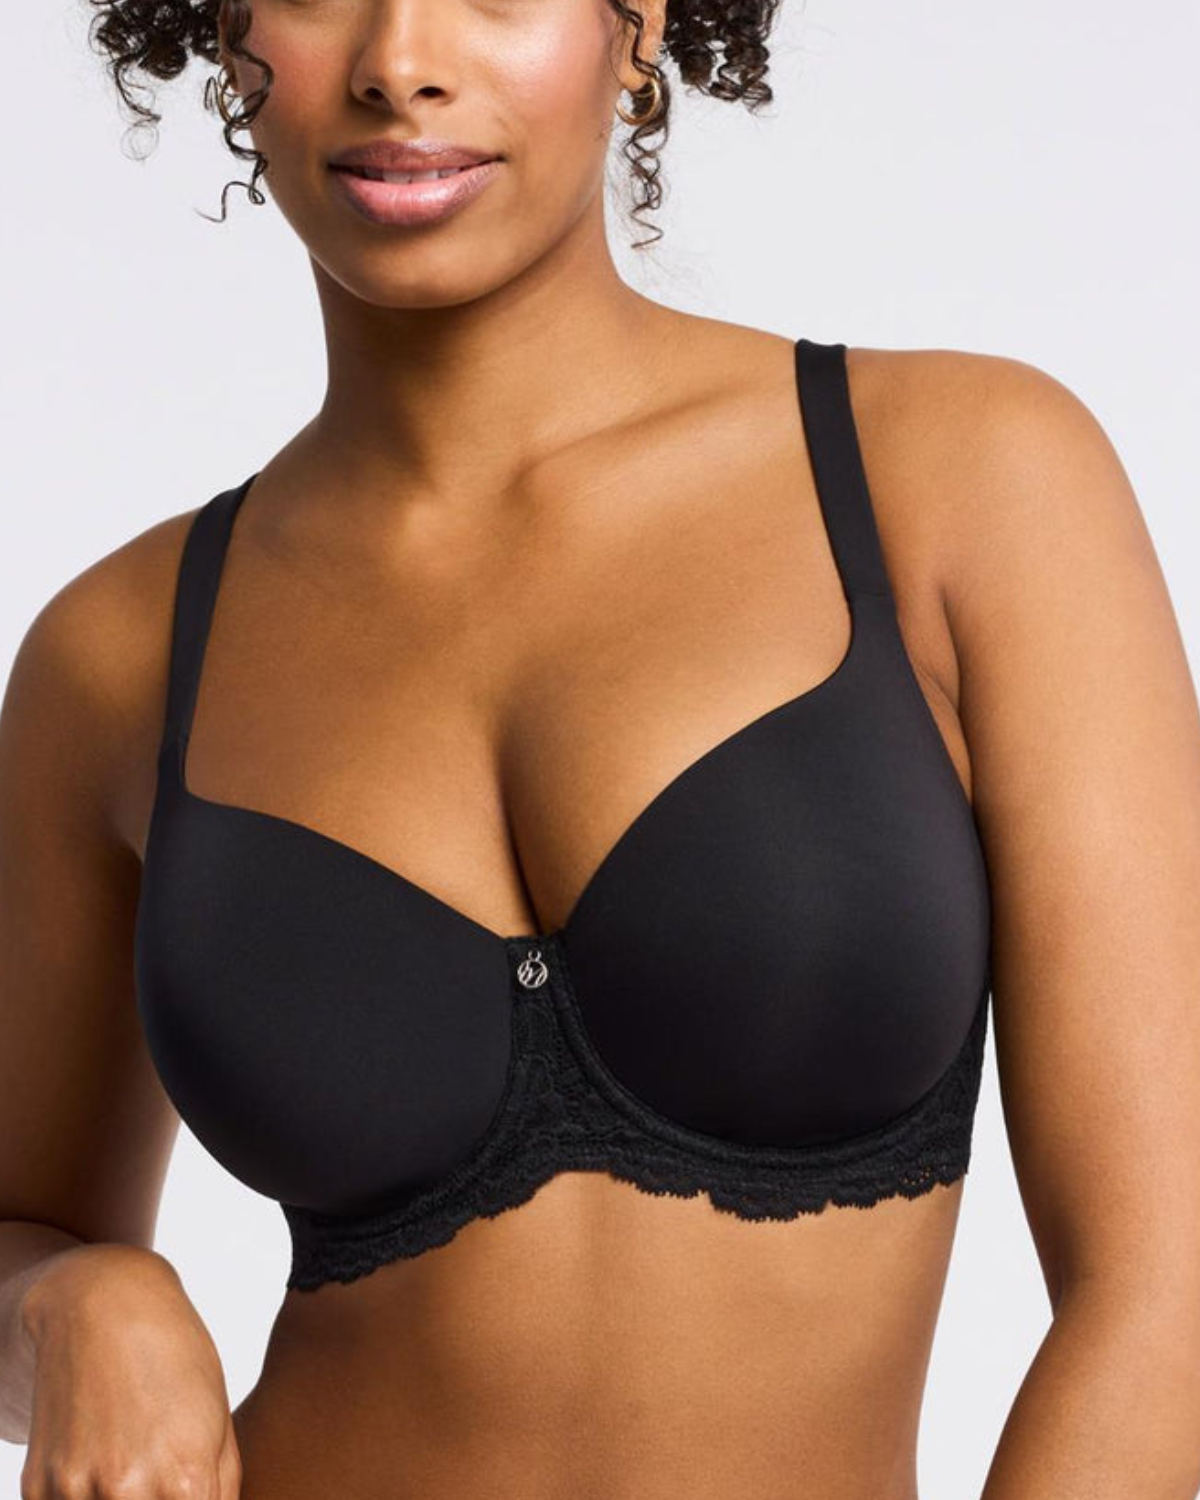 Model wearing a molded t-shirt underwire bra with lace side wings in black